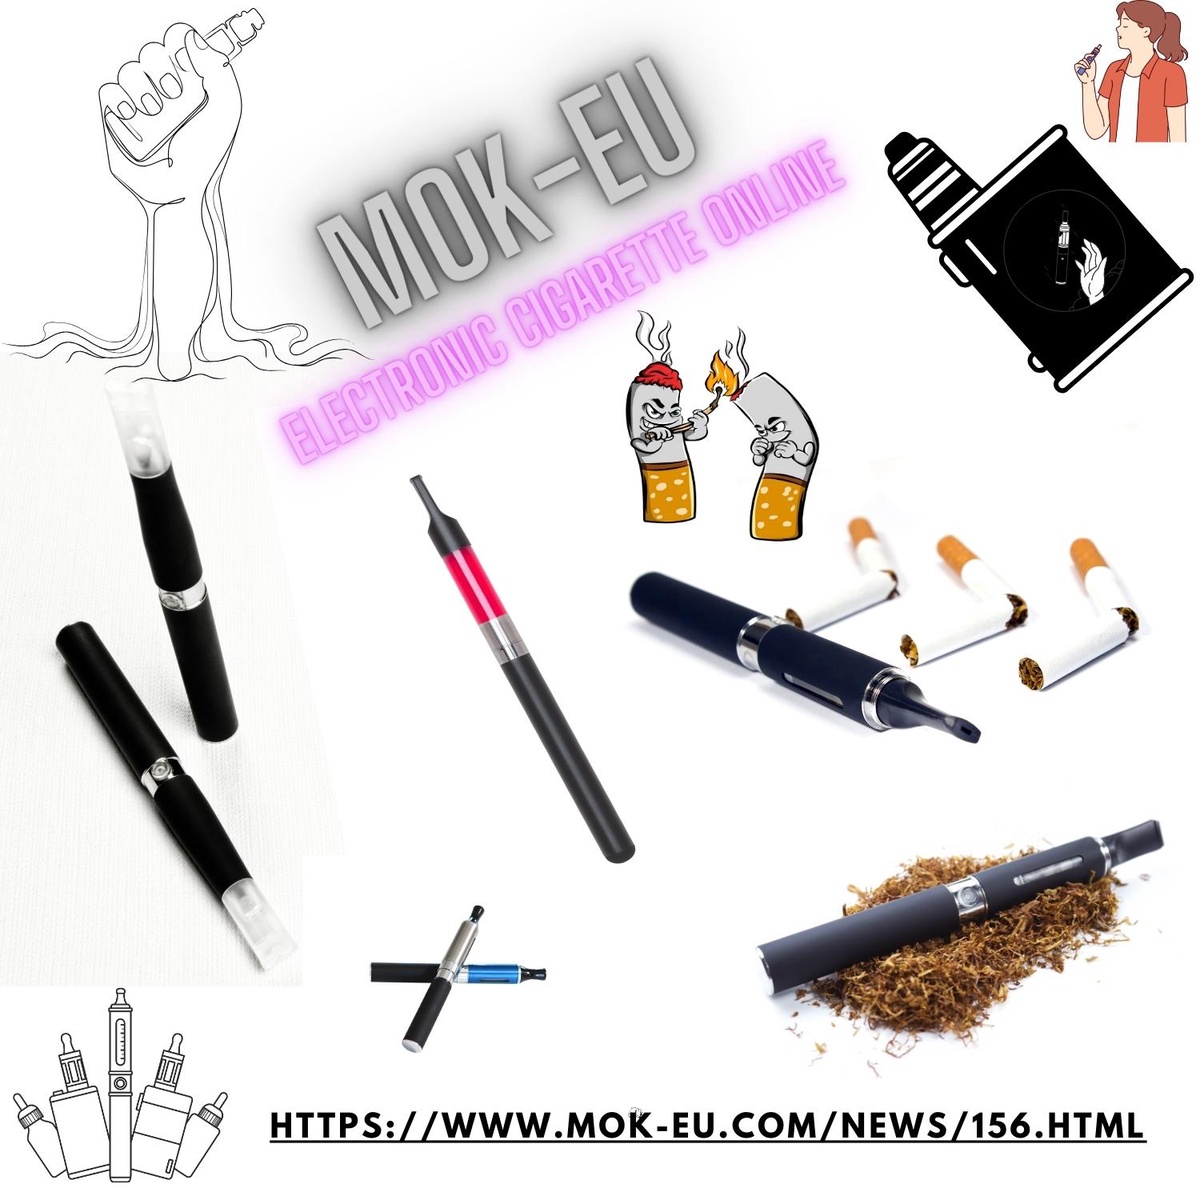 Vaporize Your Limits: Unleash Flavorful Freedom with Our Premium Electronic Cigarettes Online